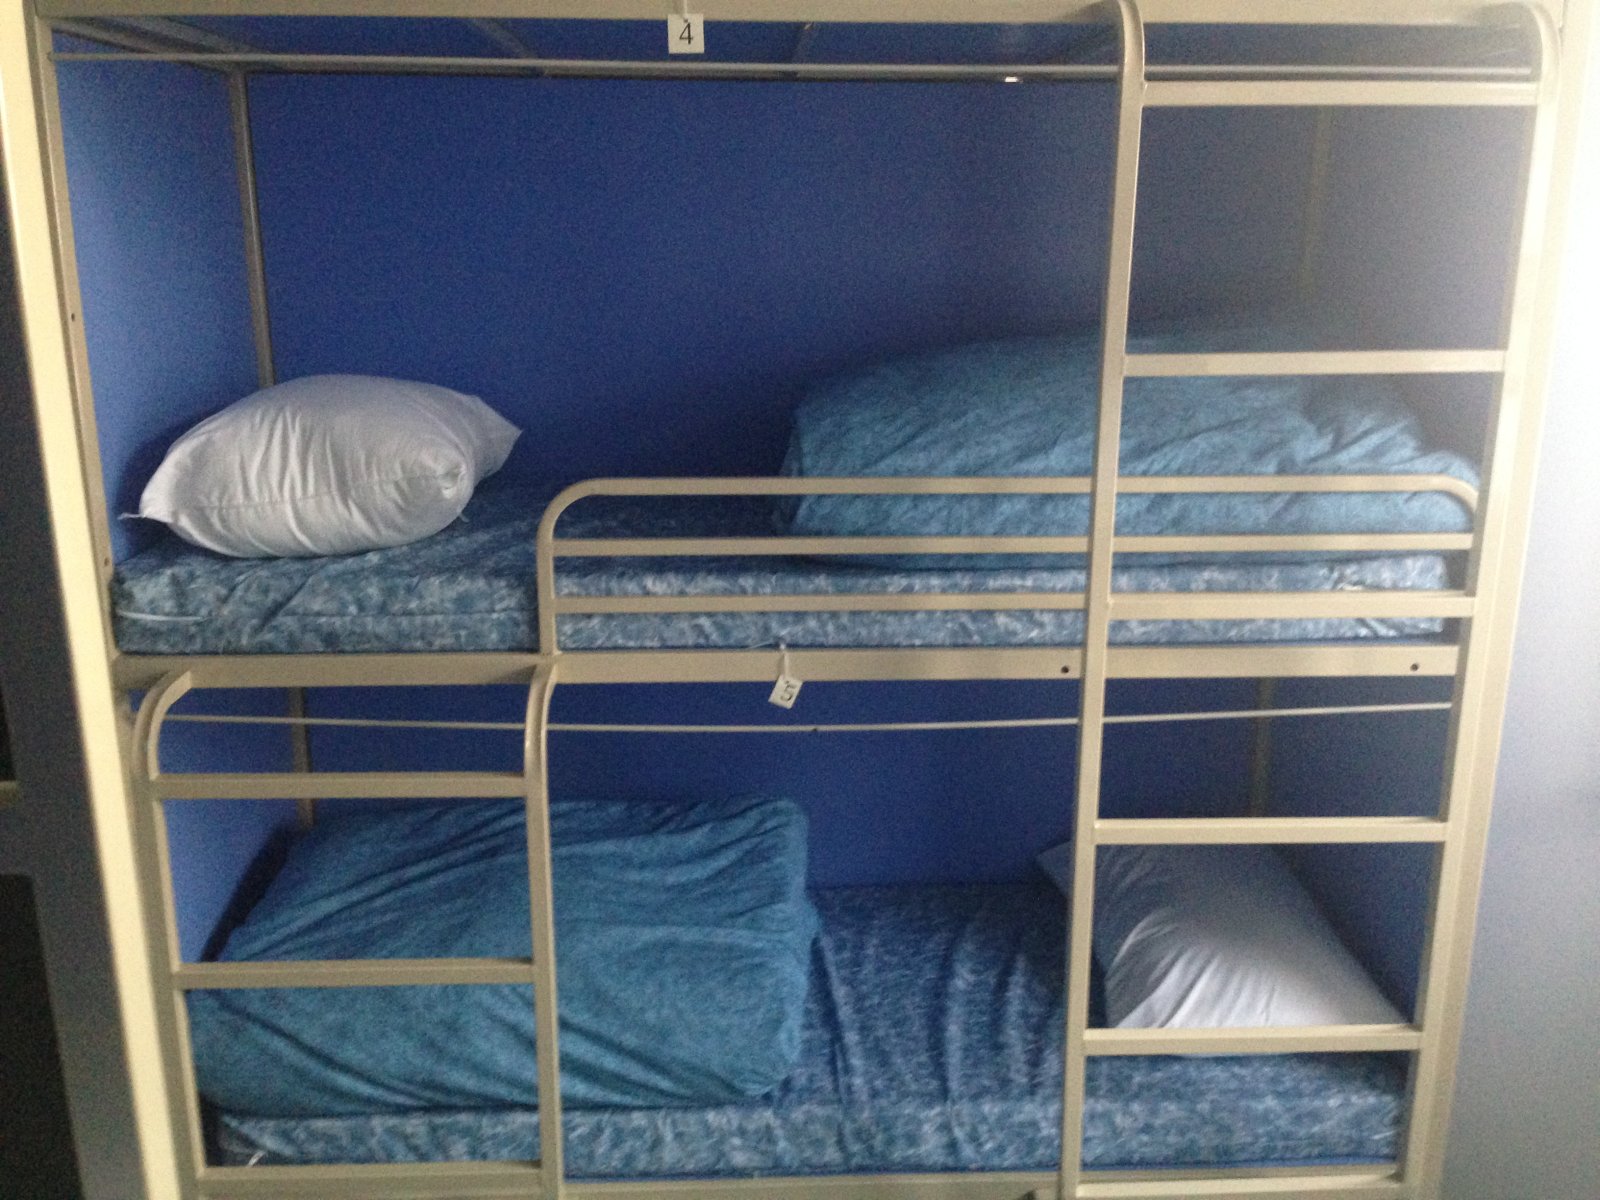 We Tried the Hostel Life for a Night